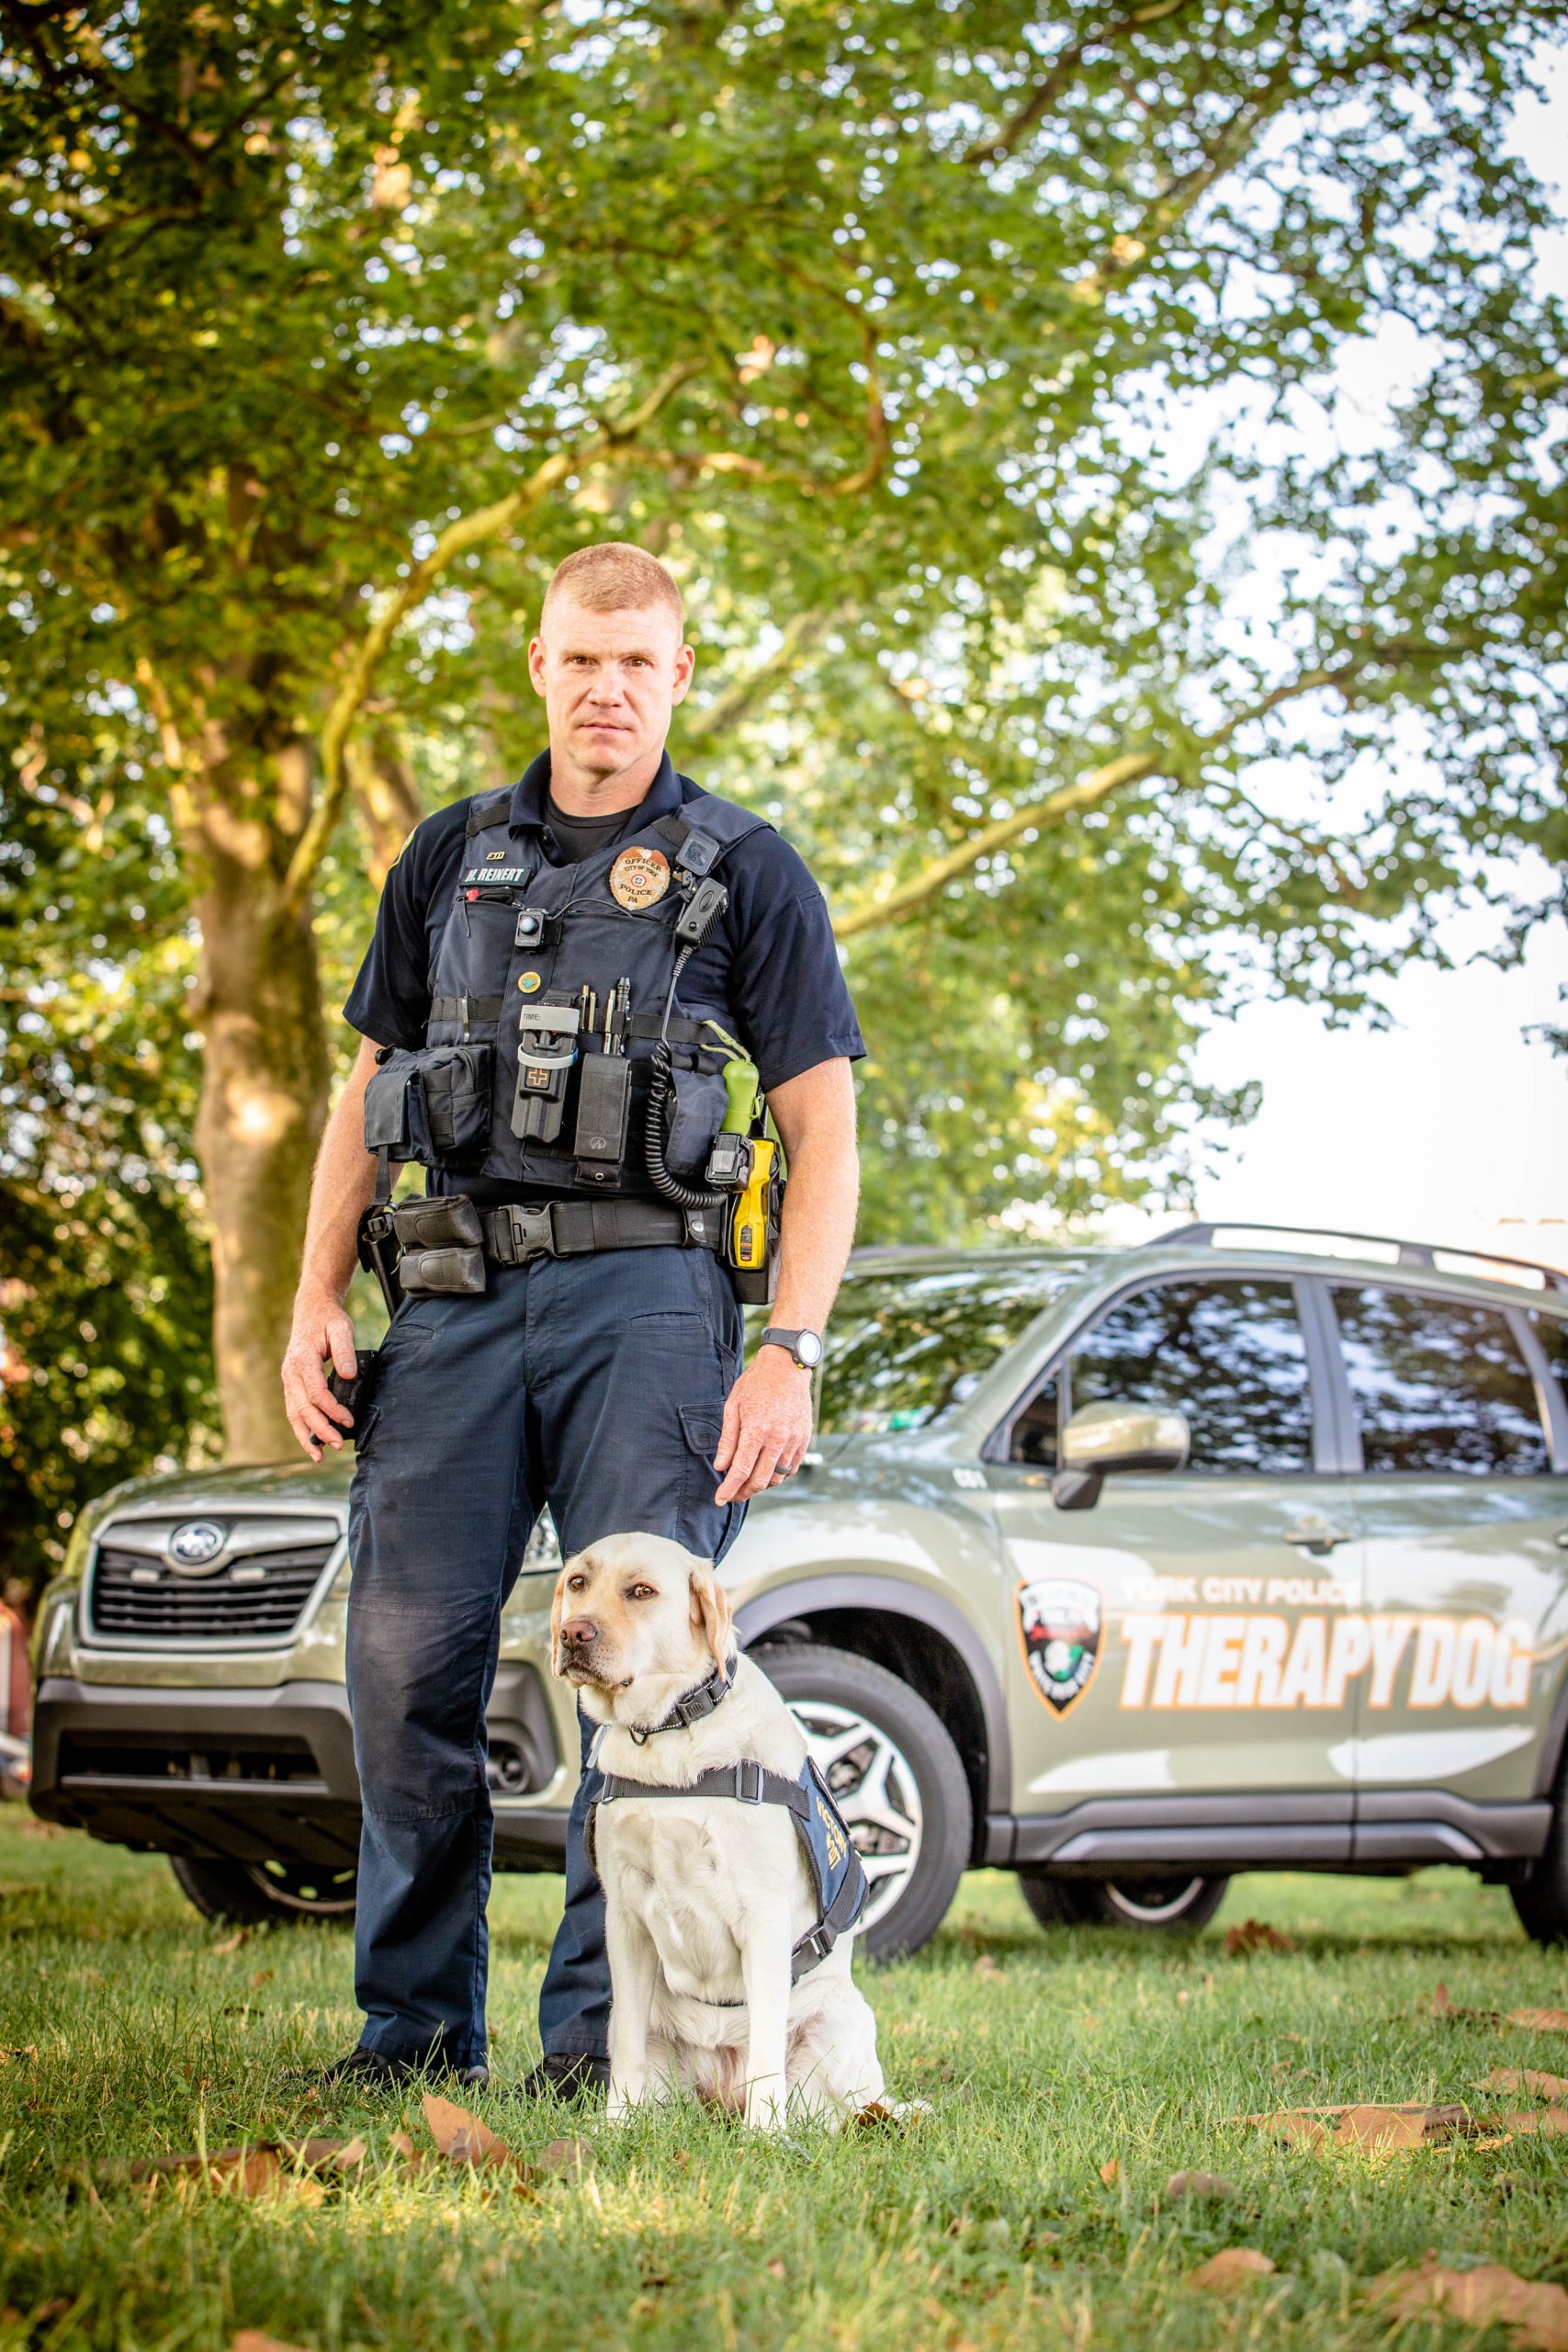 Officer Mike Reinert has spent much of his career in mental health.